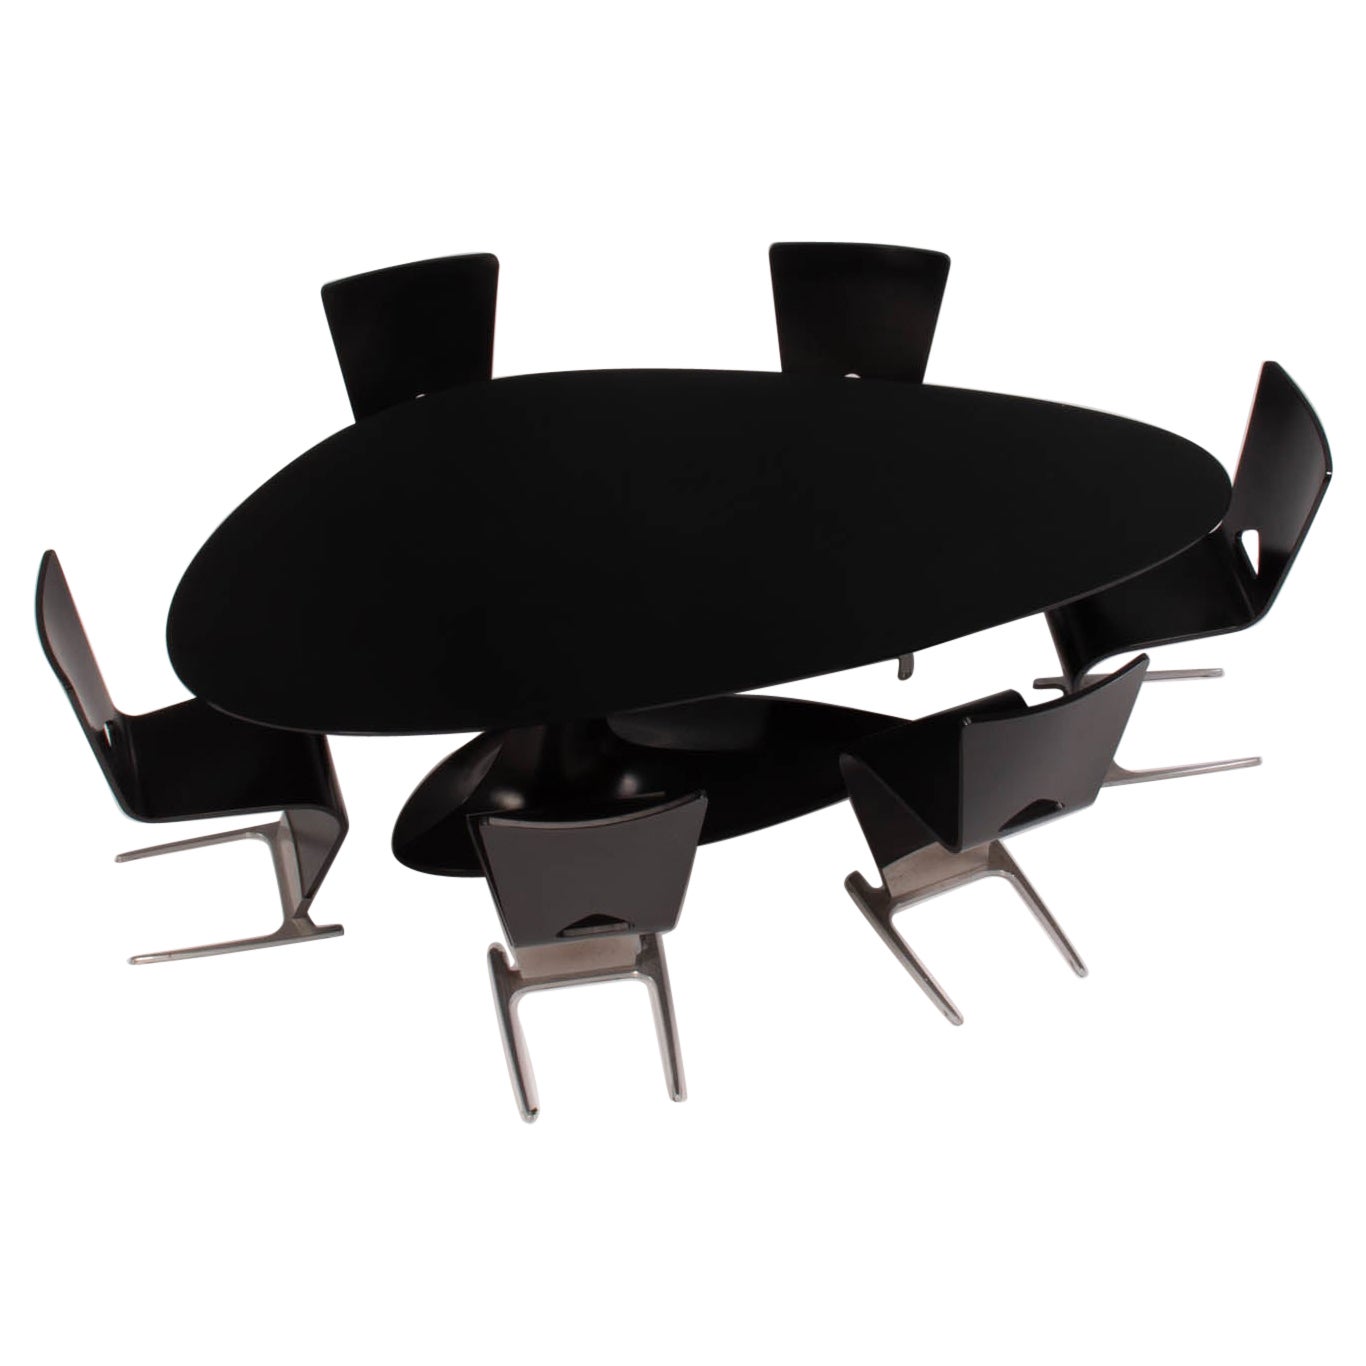 Roche Bobois Black Dining Table and Six Chairs by Sacha Lakic, 2005